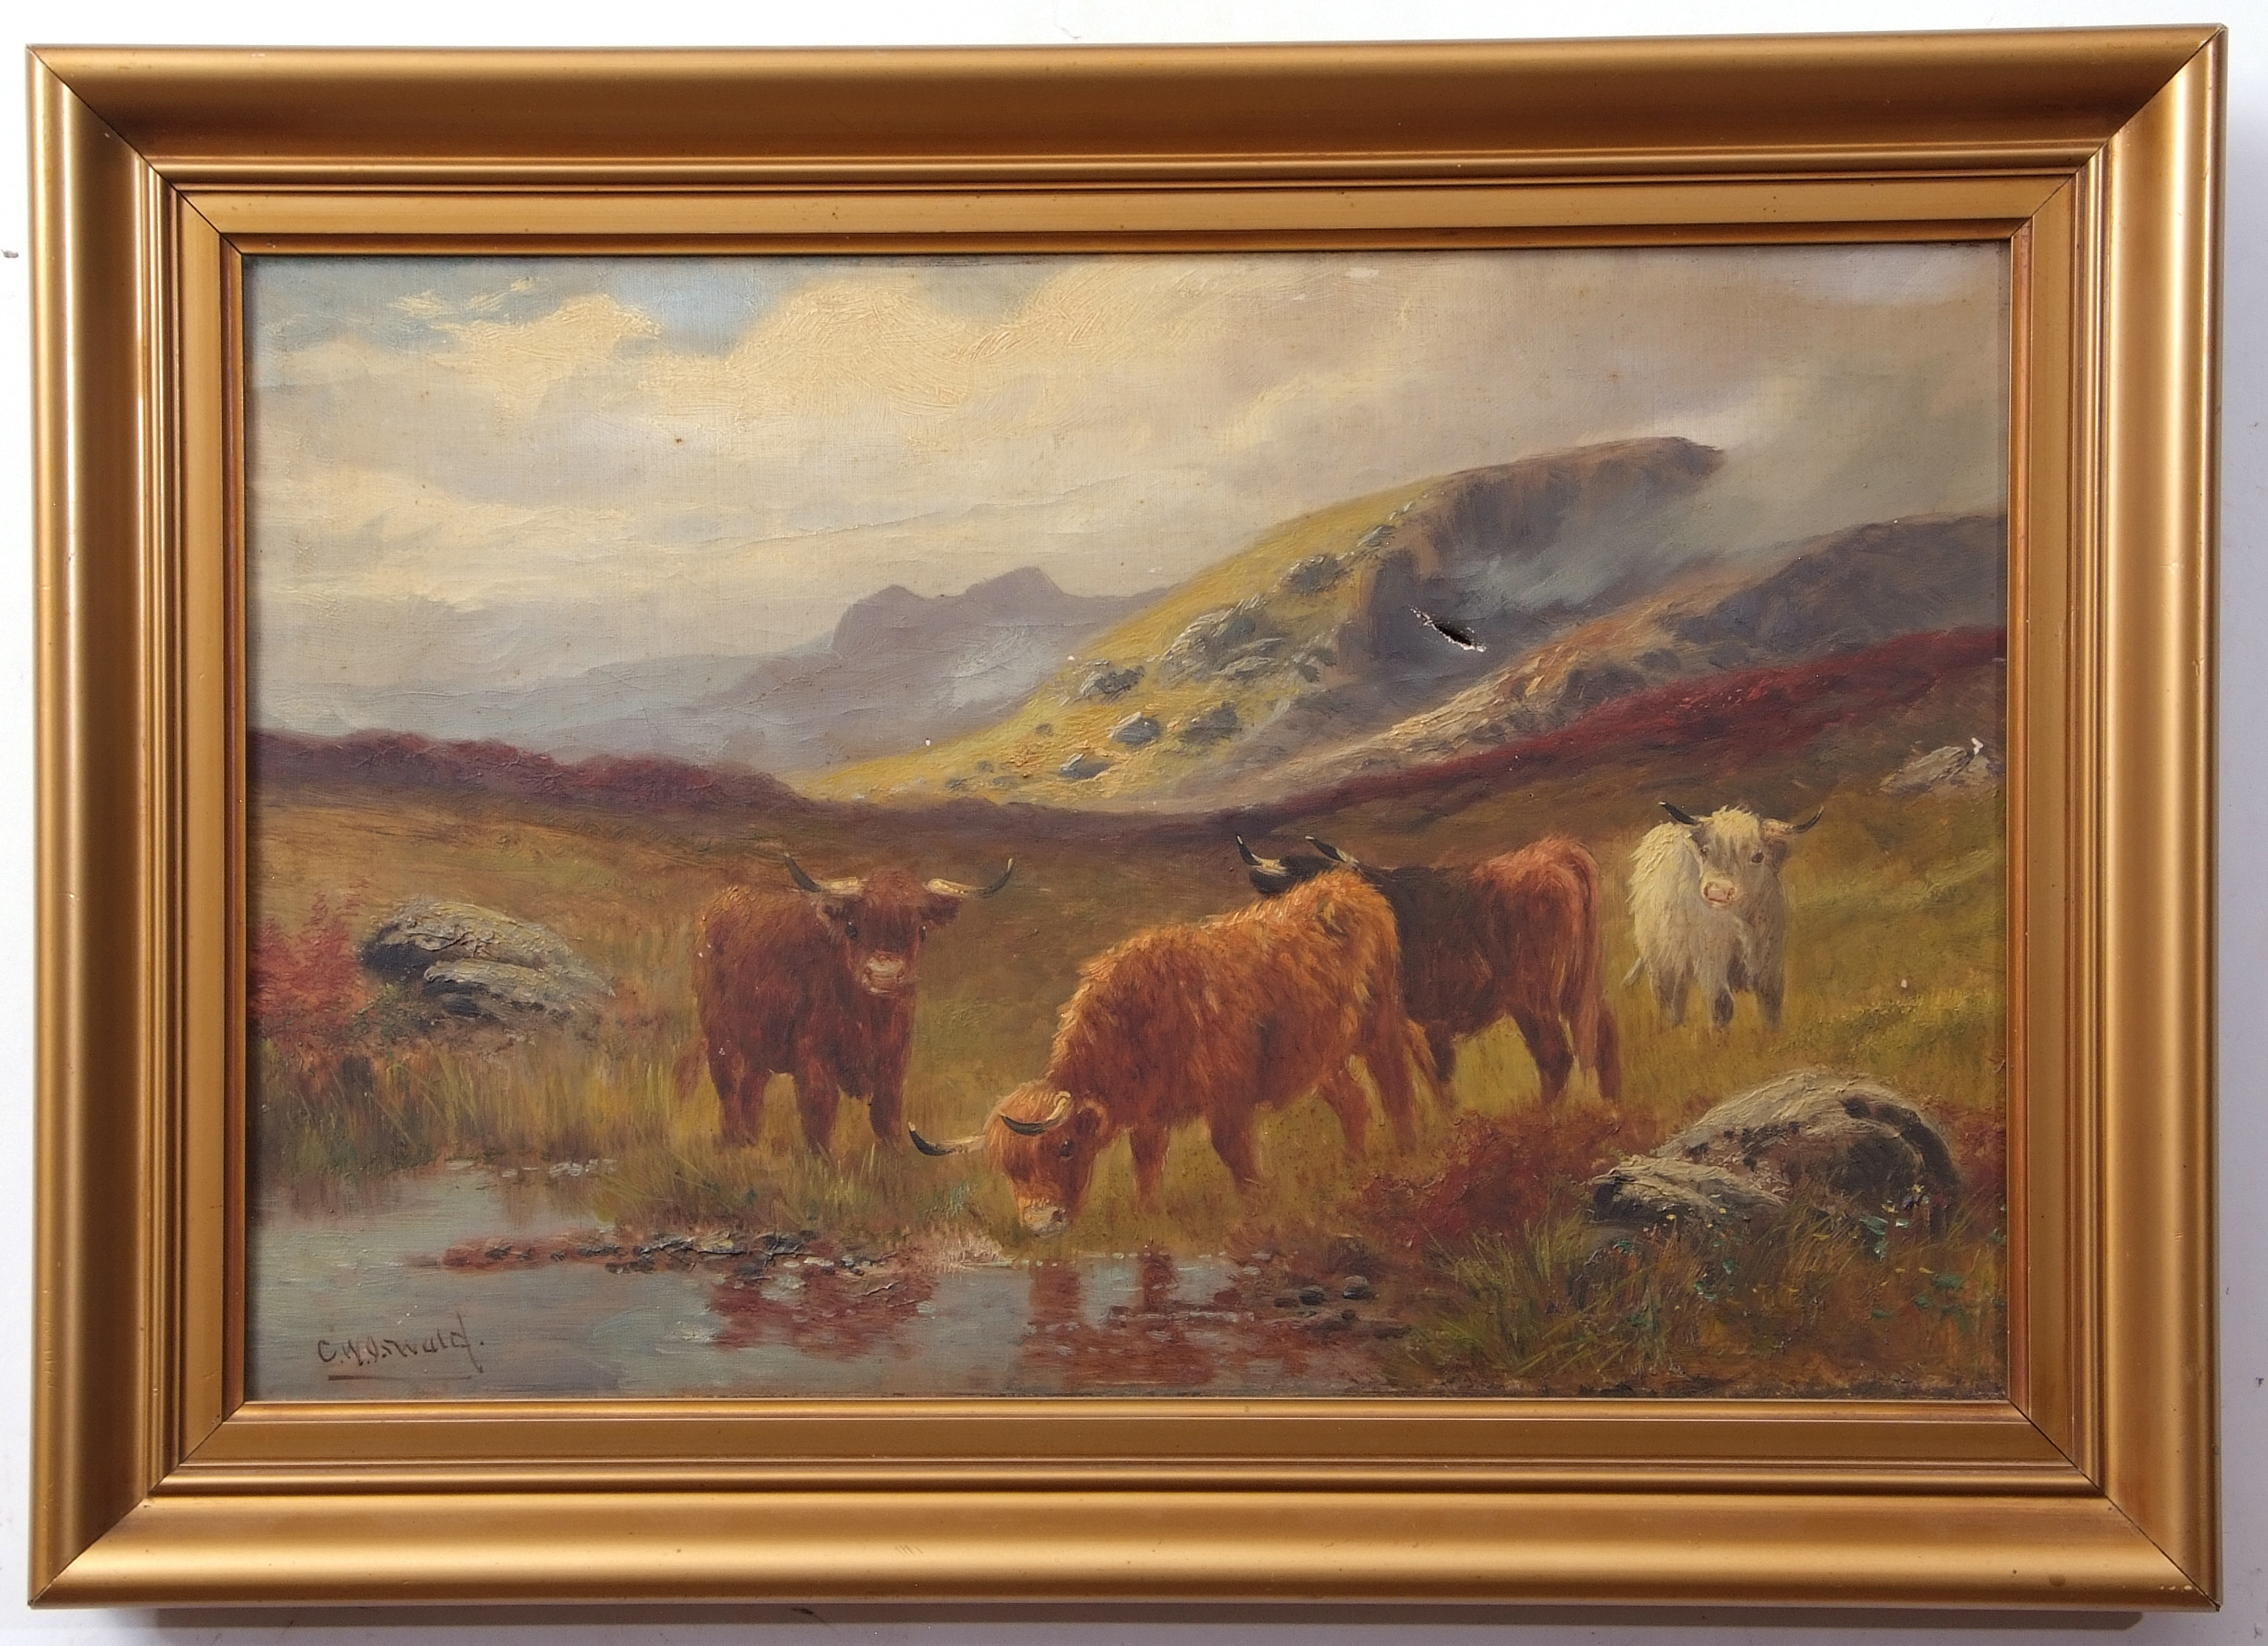 C W Oswald (19th/20th century), Scottish landscapes with Highland cattle pair of oils on canvas, - Image 2 of 2